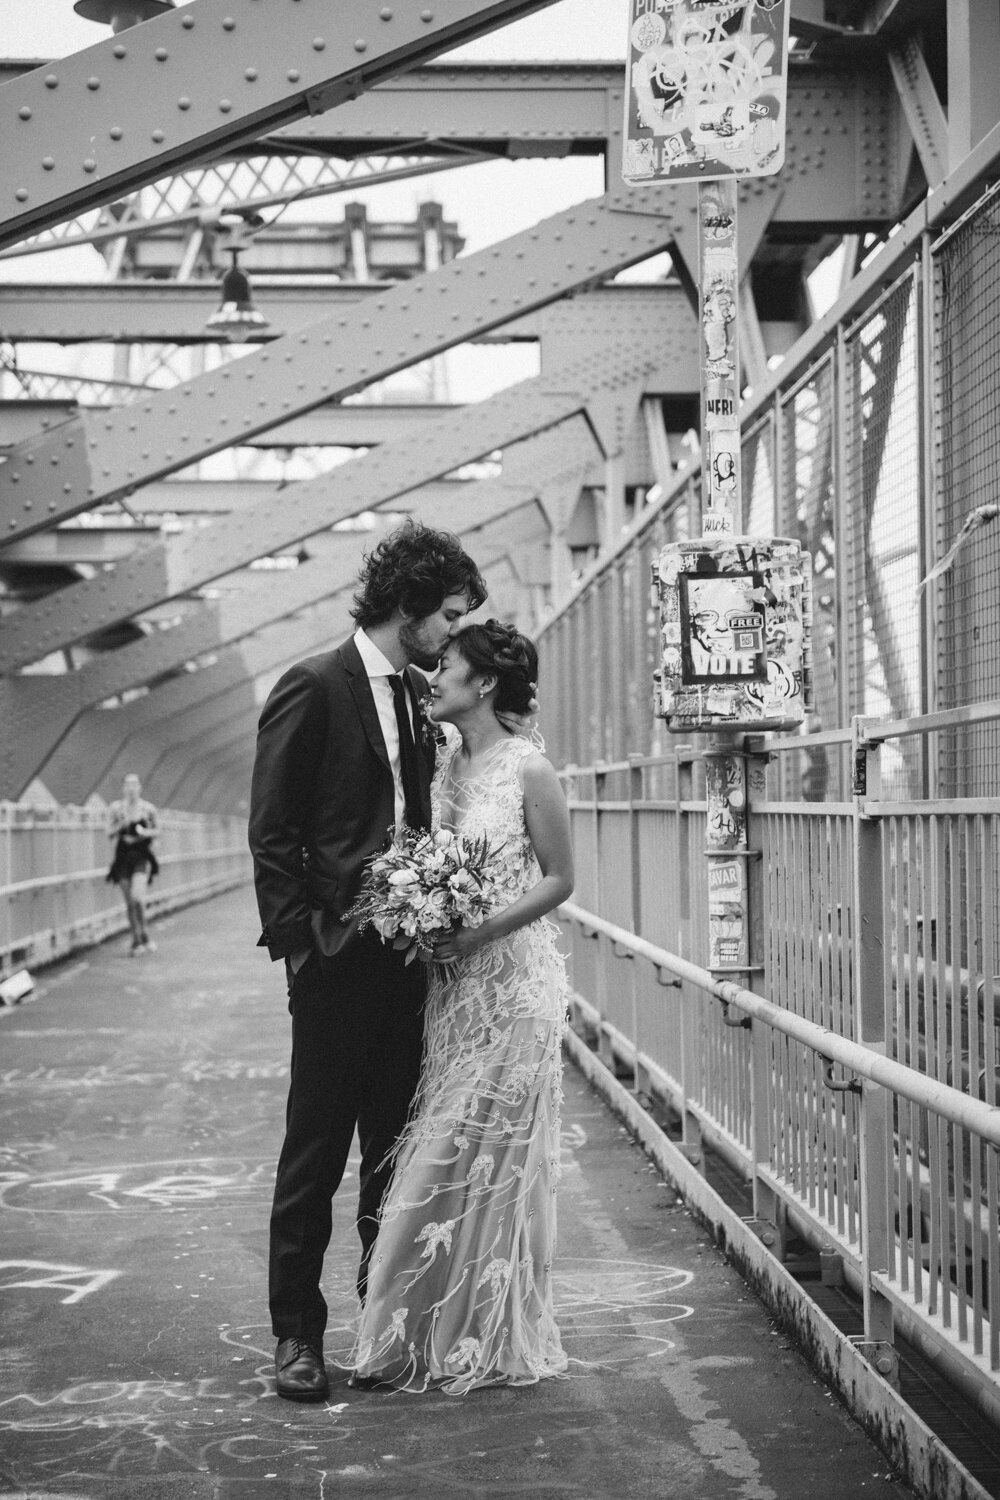 Bride and groom stand together on the Williamsburg Bridge. She is holding a bouquet of flowers and smiling and he is kissing her forehead.

Central Park Wedding Photography. Williamsburg Bridge Bridal Portraits. Luxury NYC Wedding Photographer. Manhattan Micro Wedding.